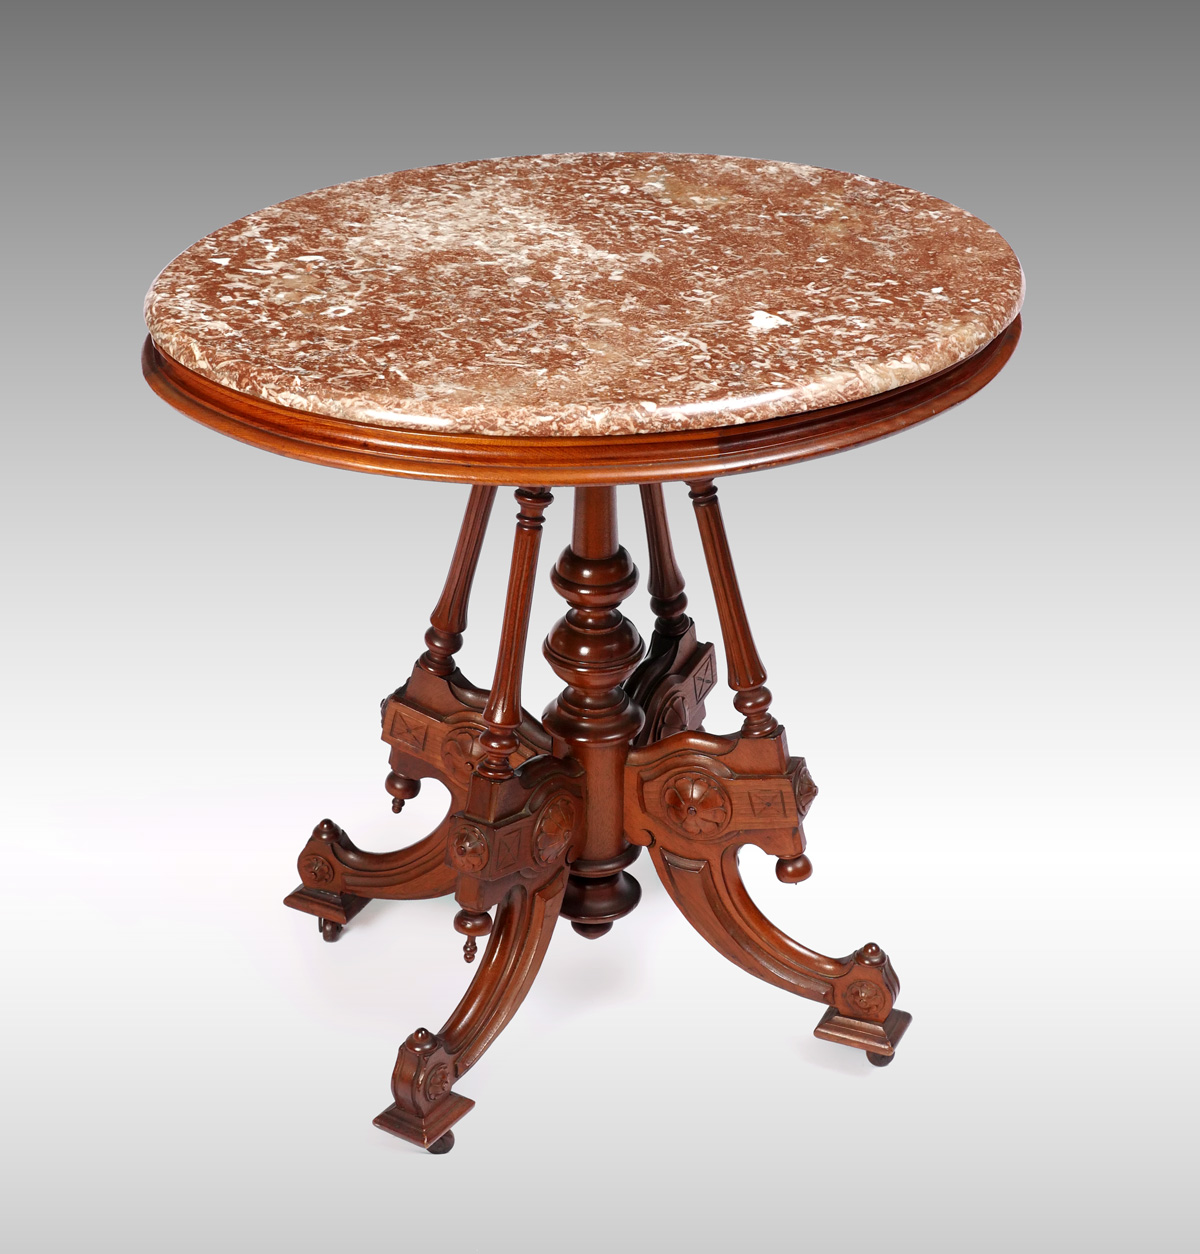 CARVED VICTORIAN MARBLE TOP TABLE: